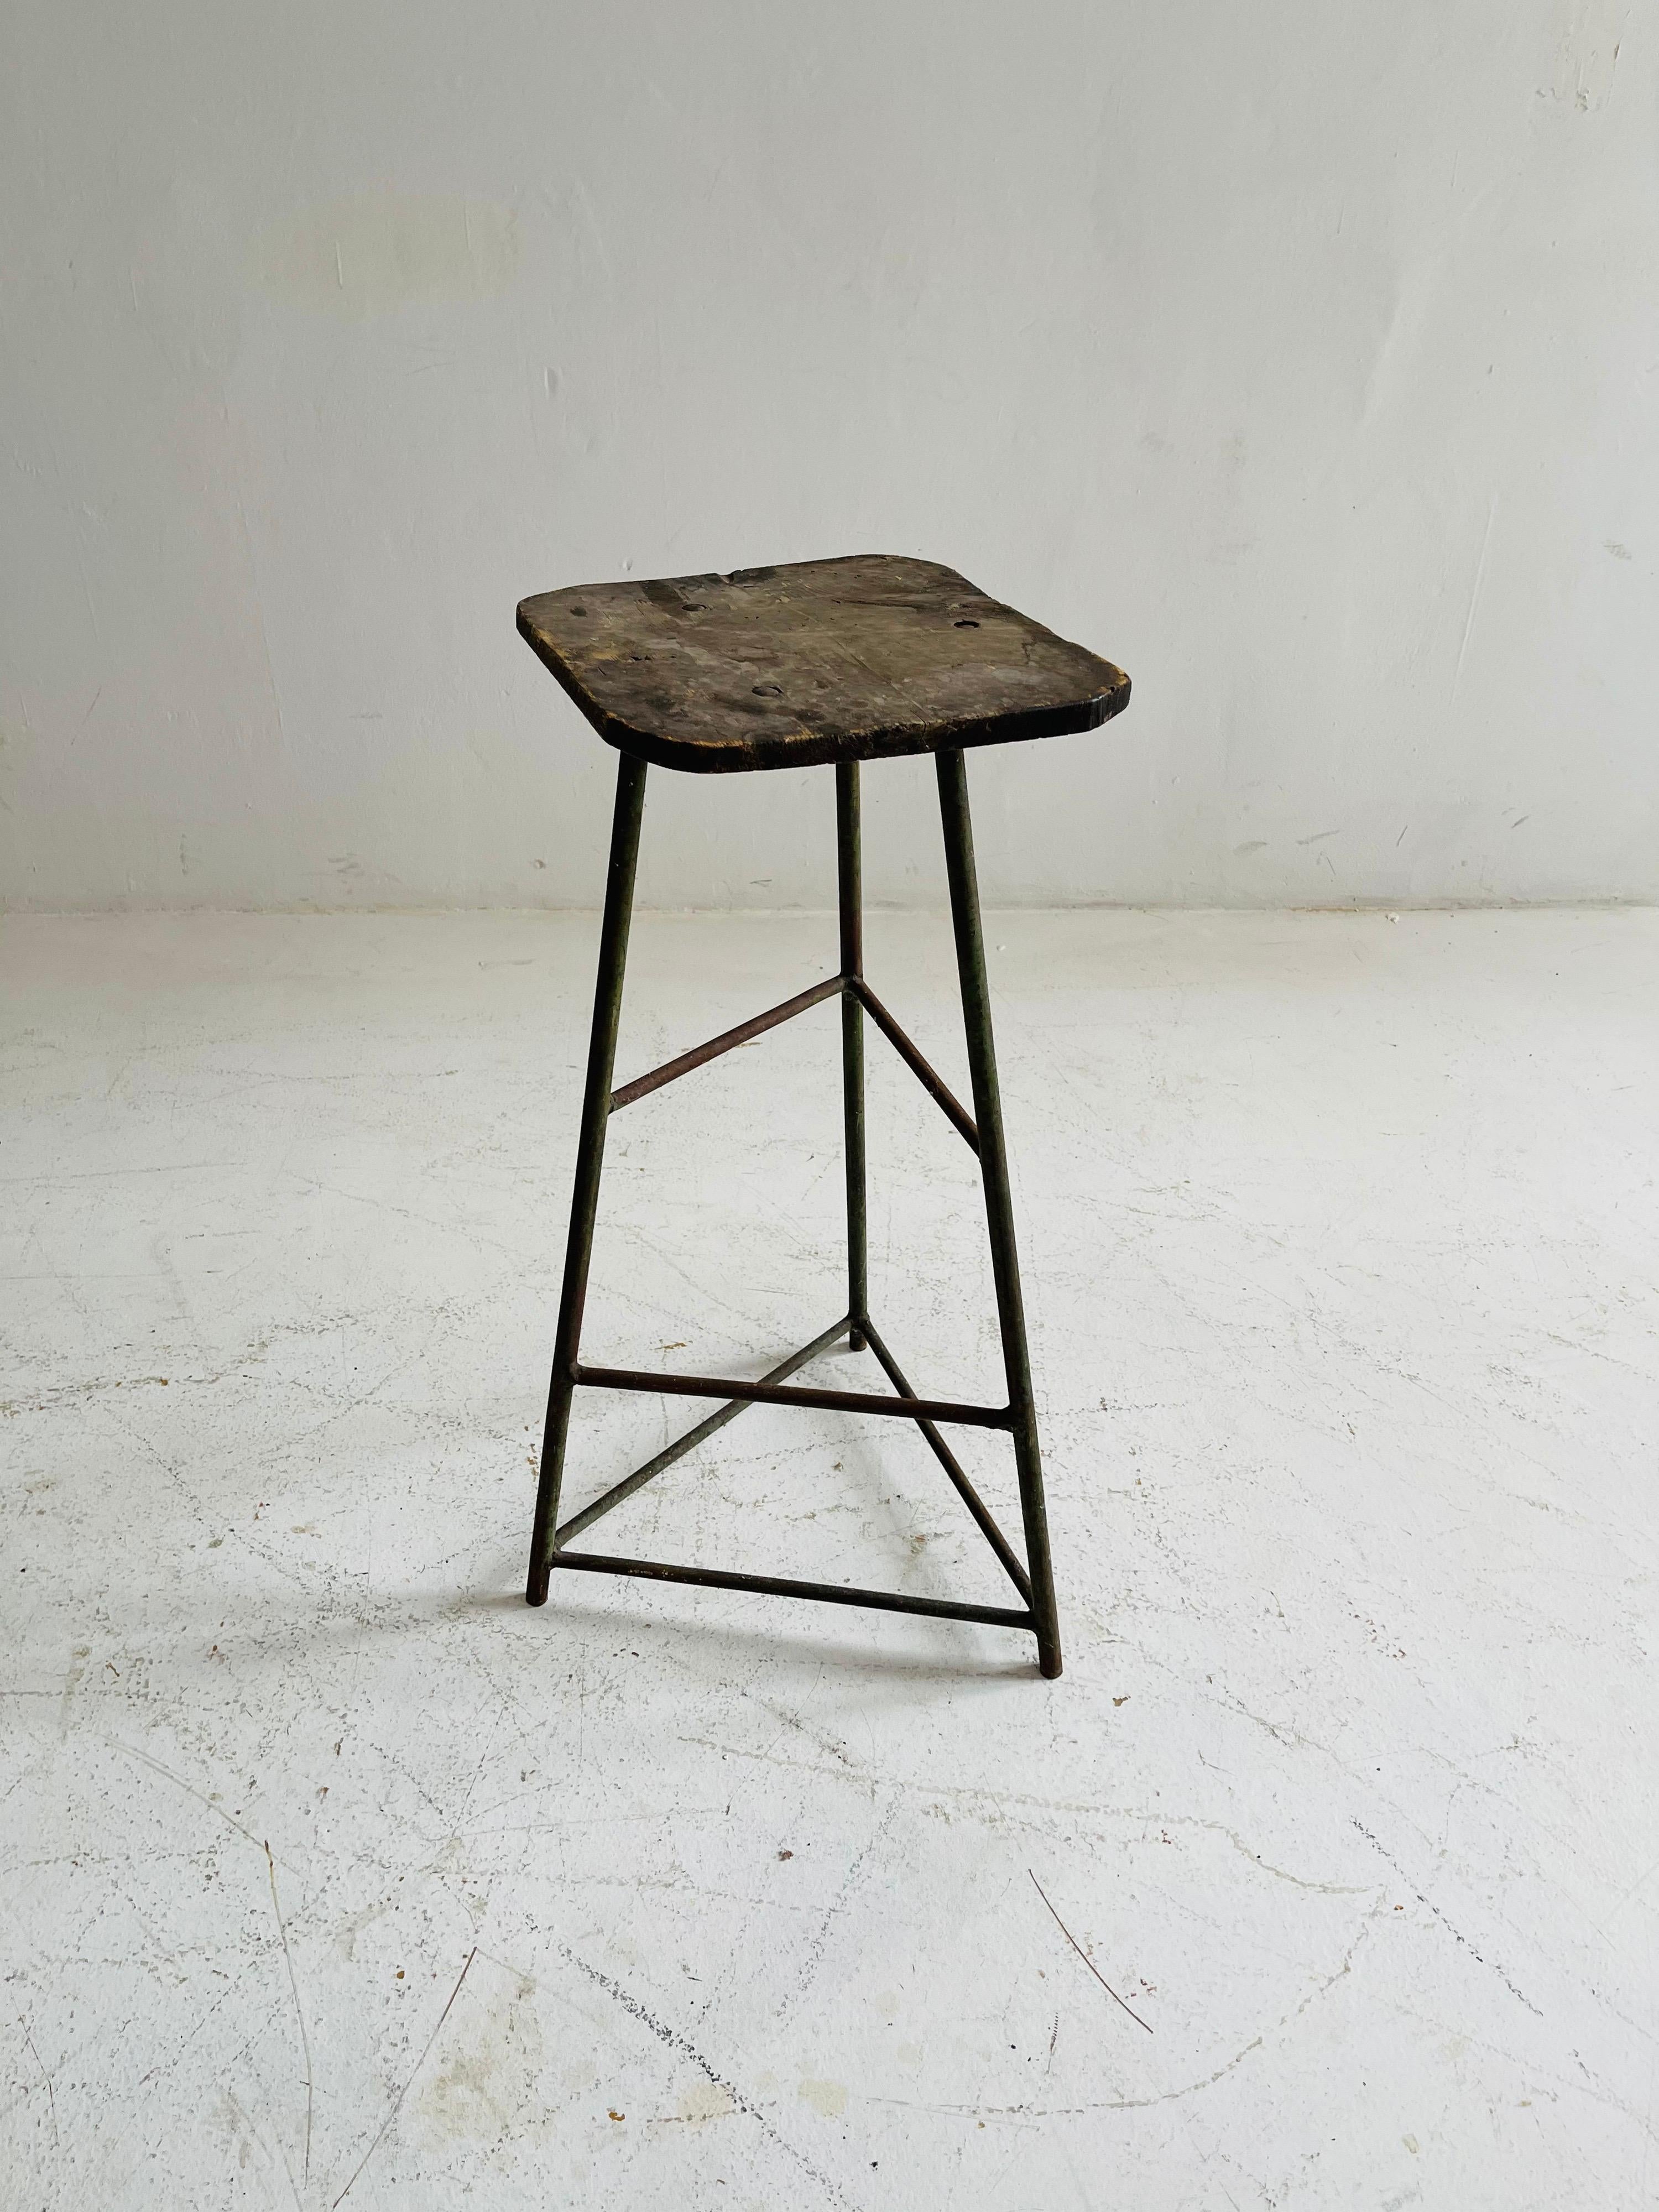 Patinated Industrial Factory Stools Group of Six, Austria, 1930s For Sale 5